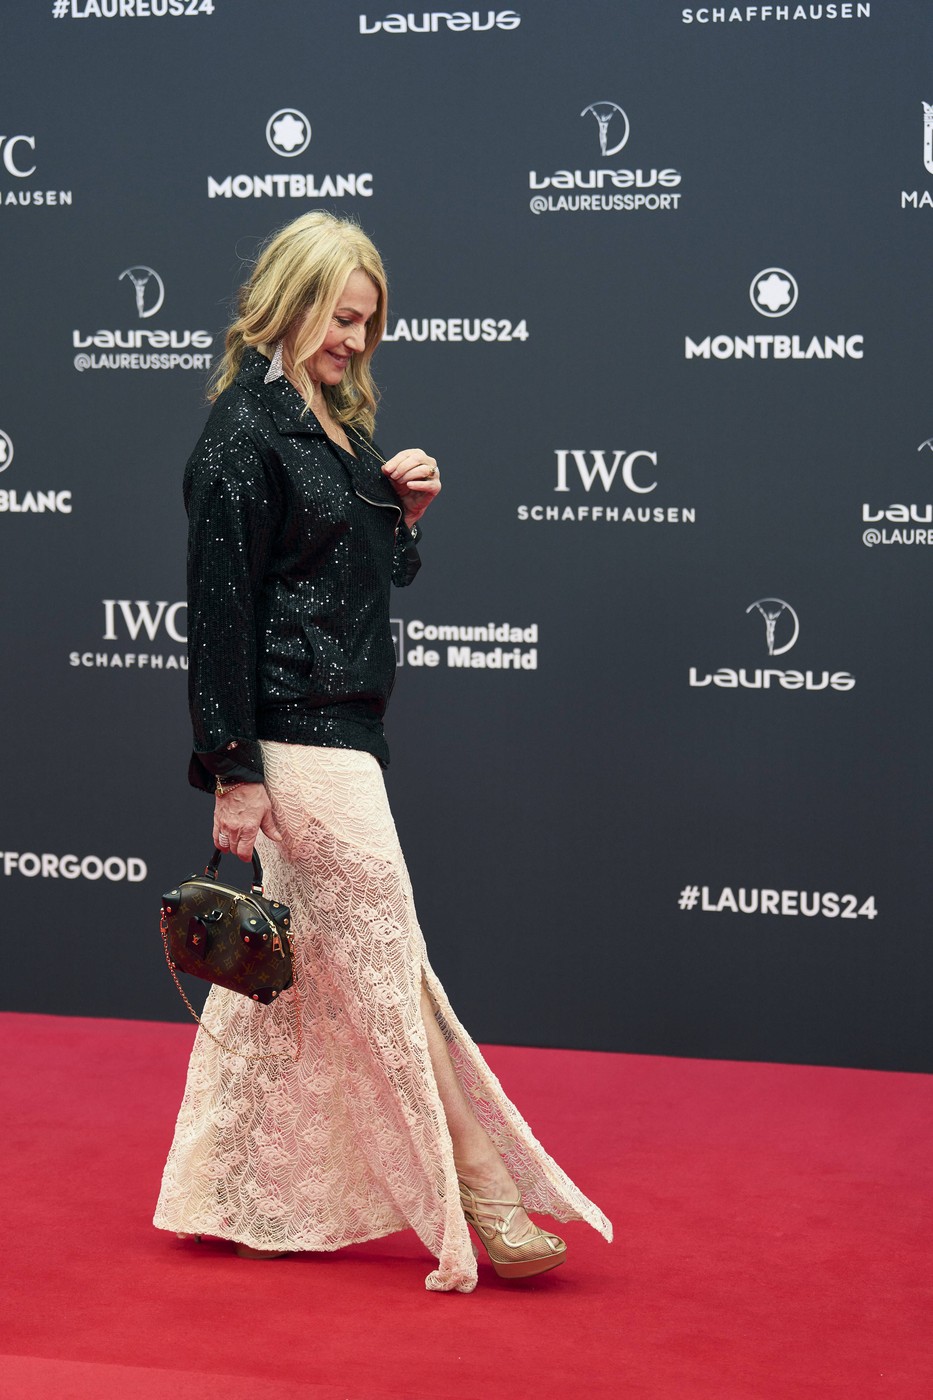 Laureus World Sports Awards Madrid 2024 - Red Carpet Nadia Comaneci attends Laureus World Sports Awards Madrid 2024 - Red Carpet at Palacio de Cibeles on April 22, 2024 in Madrid, Spain Photo by IMAGO/MPG Madrid Palacio de Cibeles Madrid Spain Copyright: xMPGx,Image: 867113963, License: Rights-managed, Restrictions: PUBLICATIONxNOTxINxESPxNED, Credit images as 